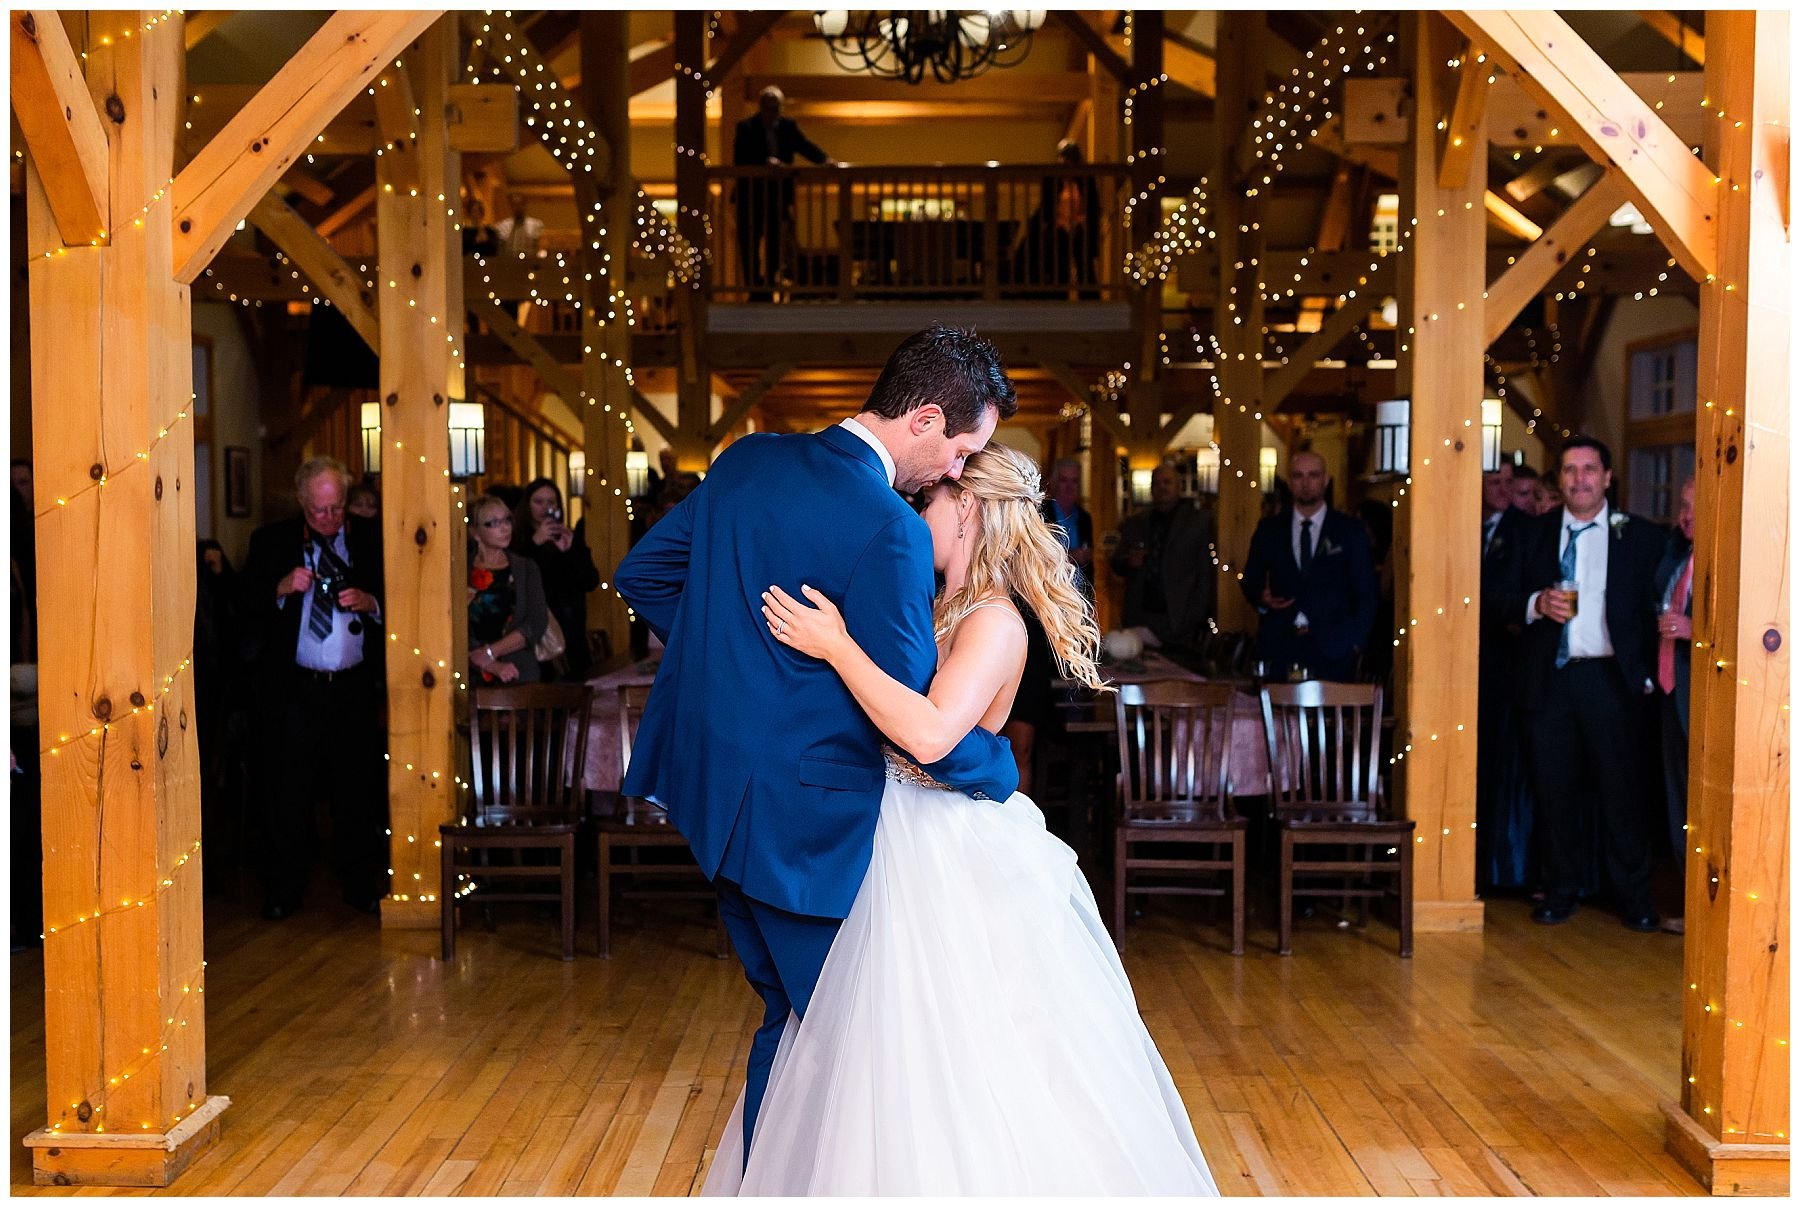 First dance bride and groom at Temple's sugar bush wedding